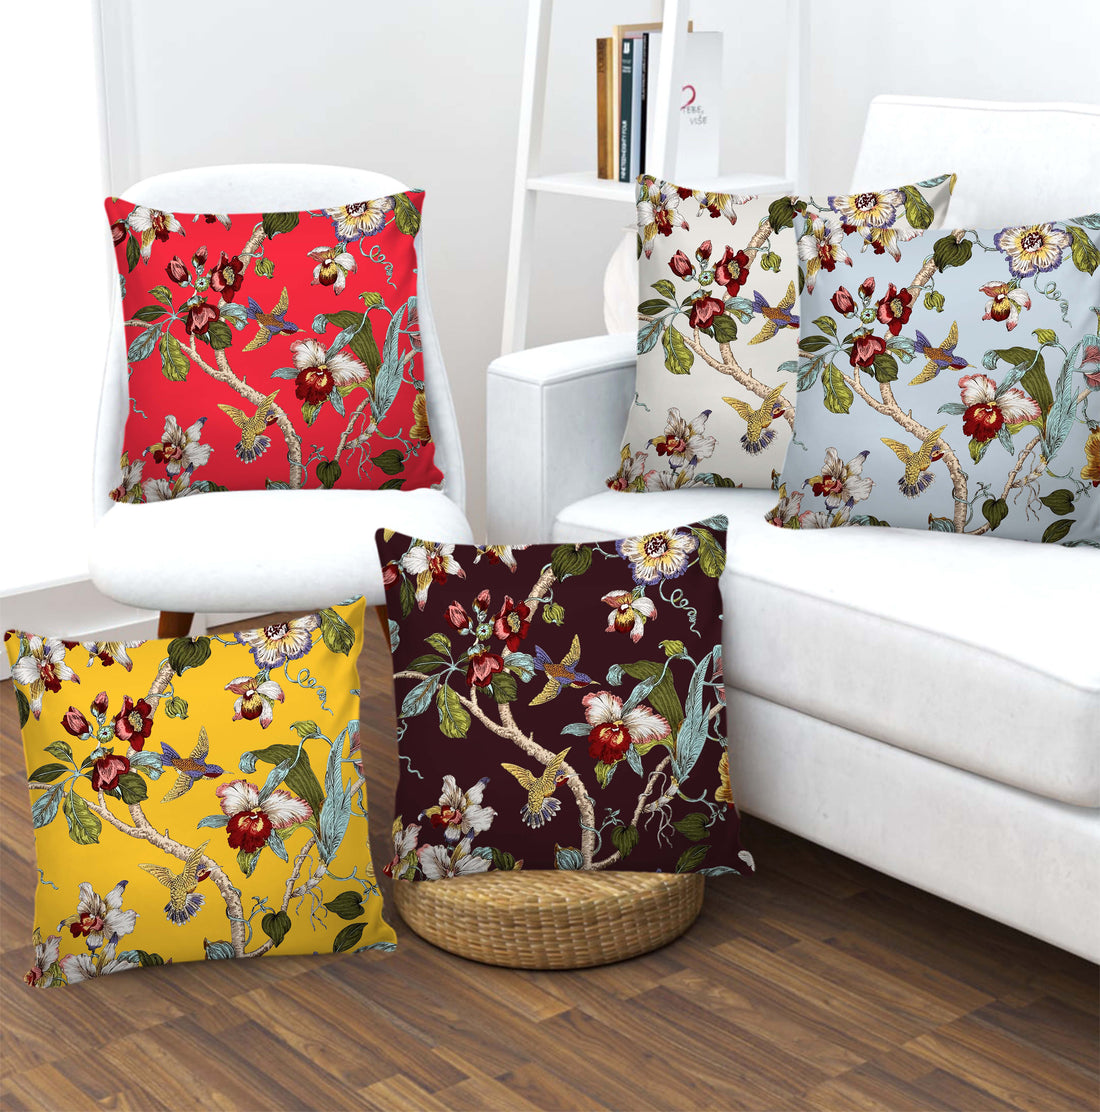 Set of 5 Digital Printed Hand Stitched Throw Pillow/ Cushion Covers